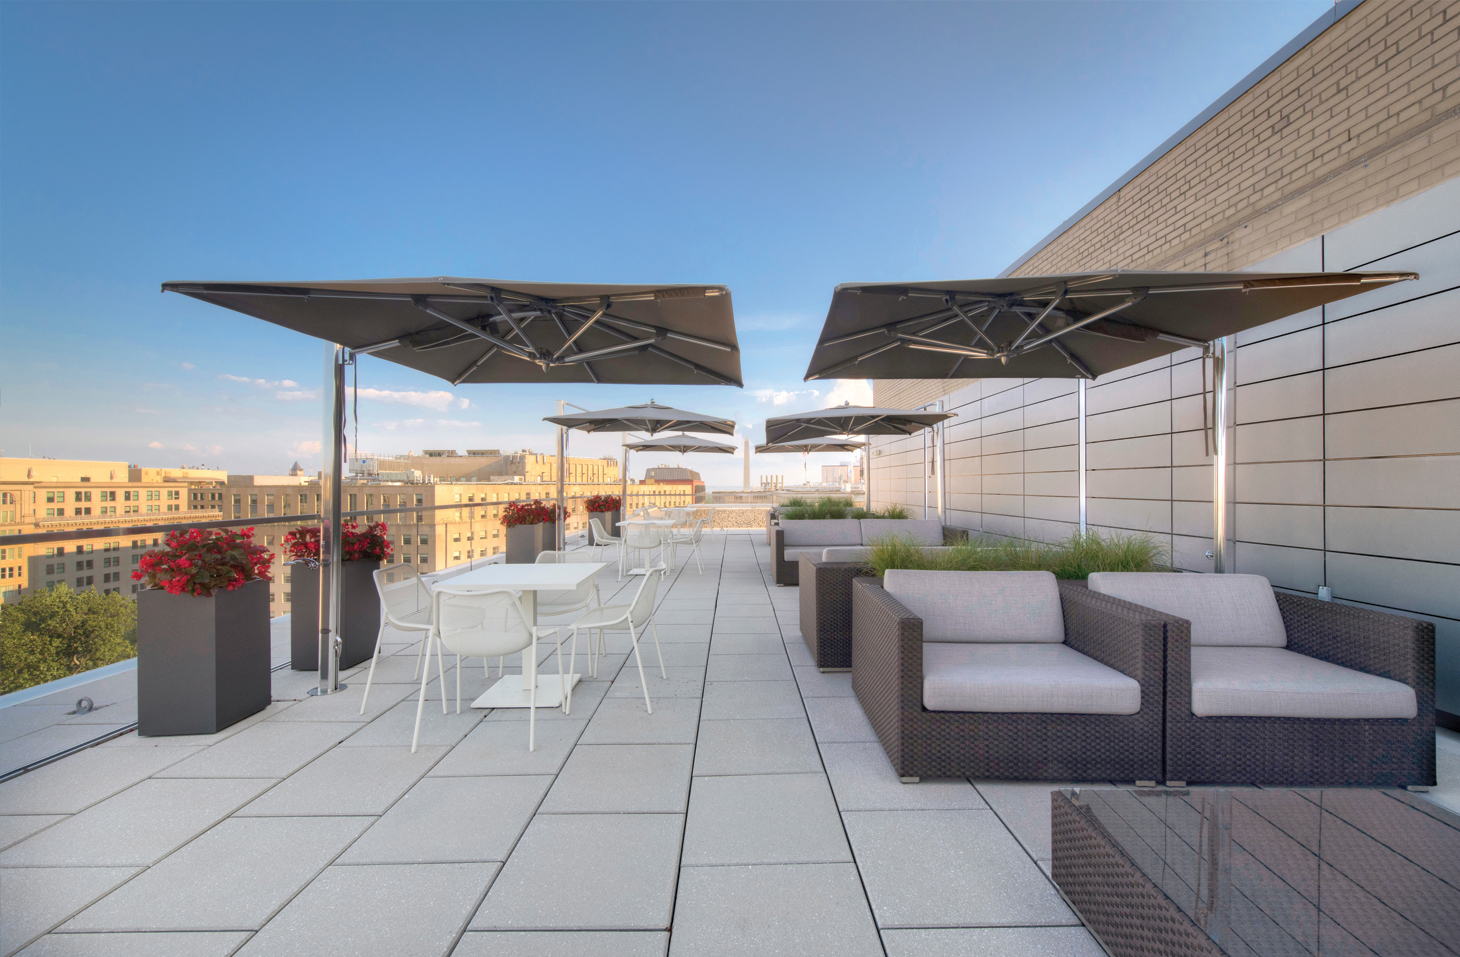 Image of the 1500 K Street rooftop terrace, with outdoor furniture, umbrellas and striking views.